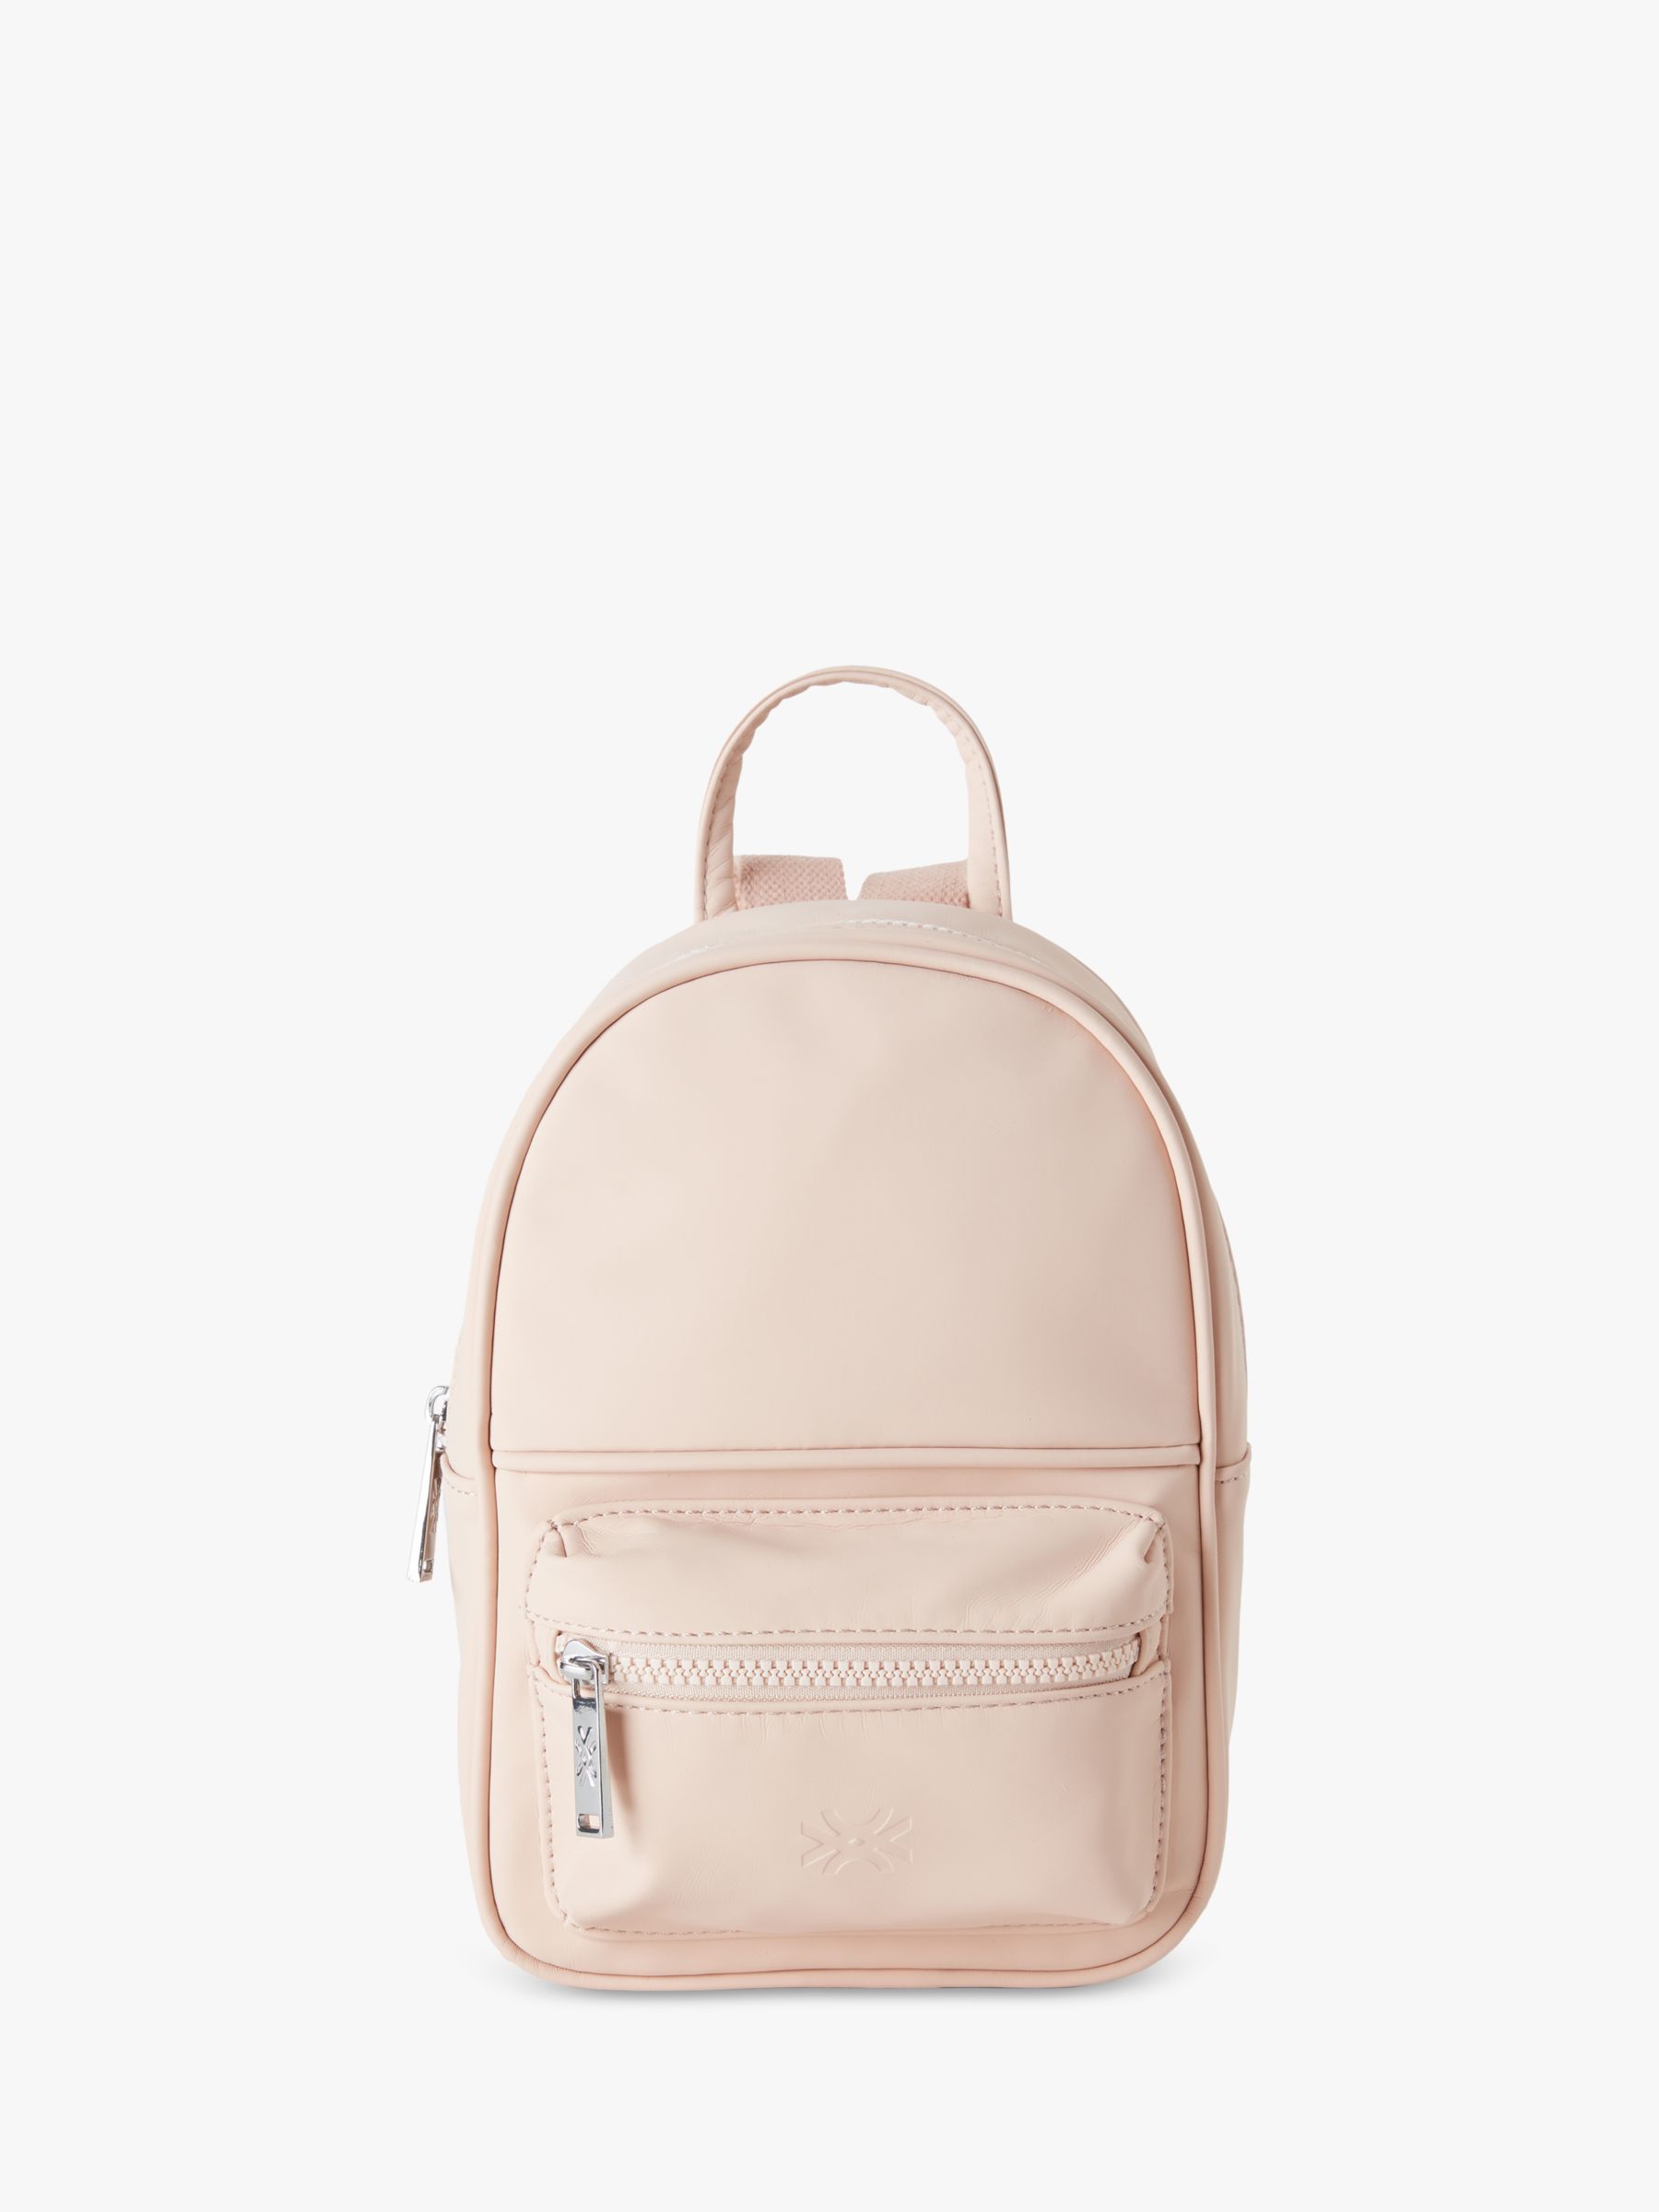 Benetton Kids' Logo Leatherette Backpack, Peach, One Size